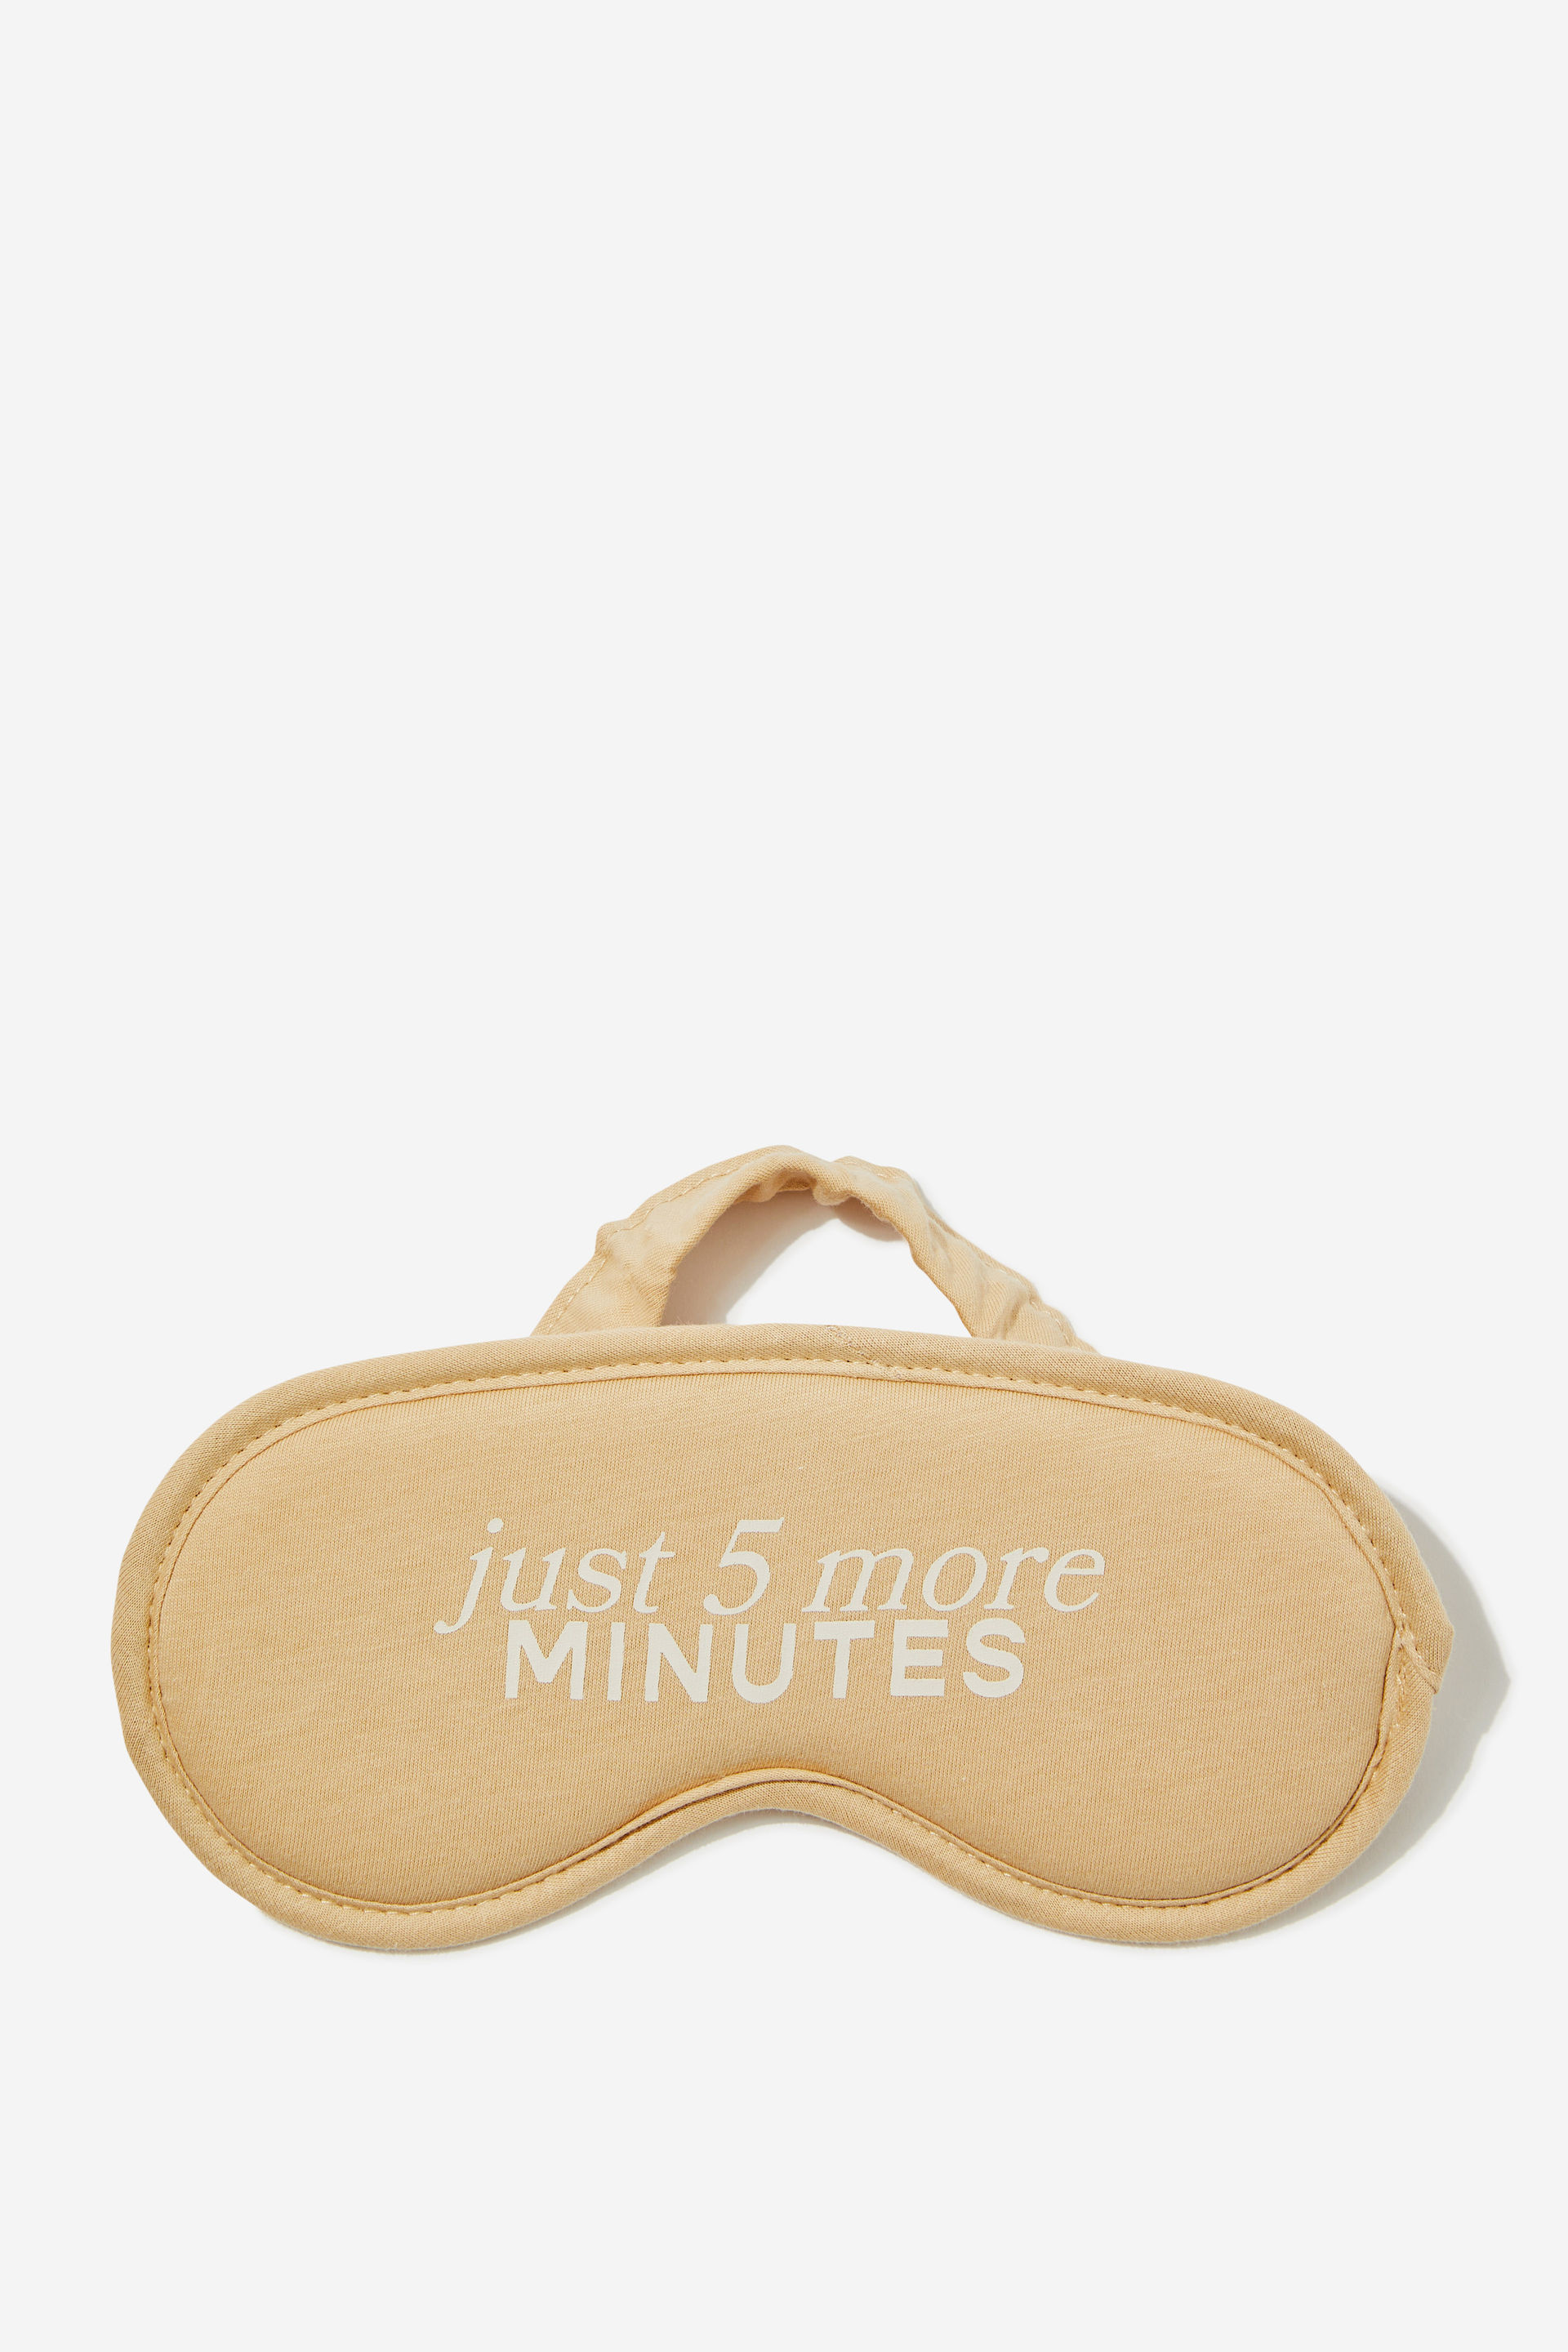 Typo - Off The Grid Eyemask - 5 more mins/ latte